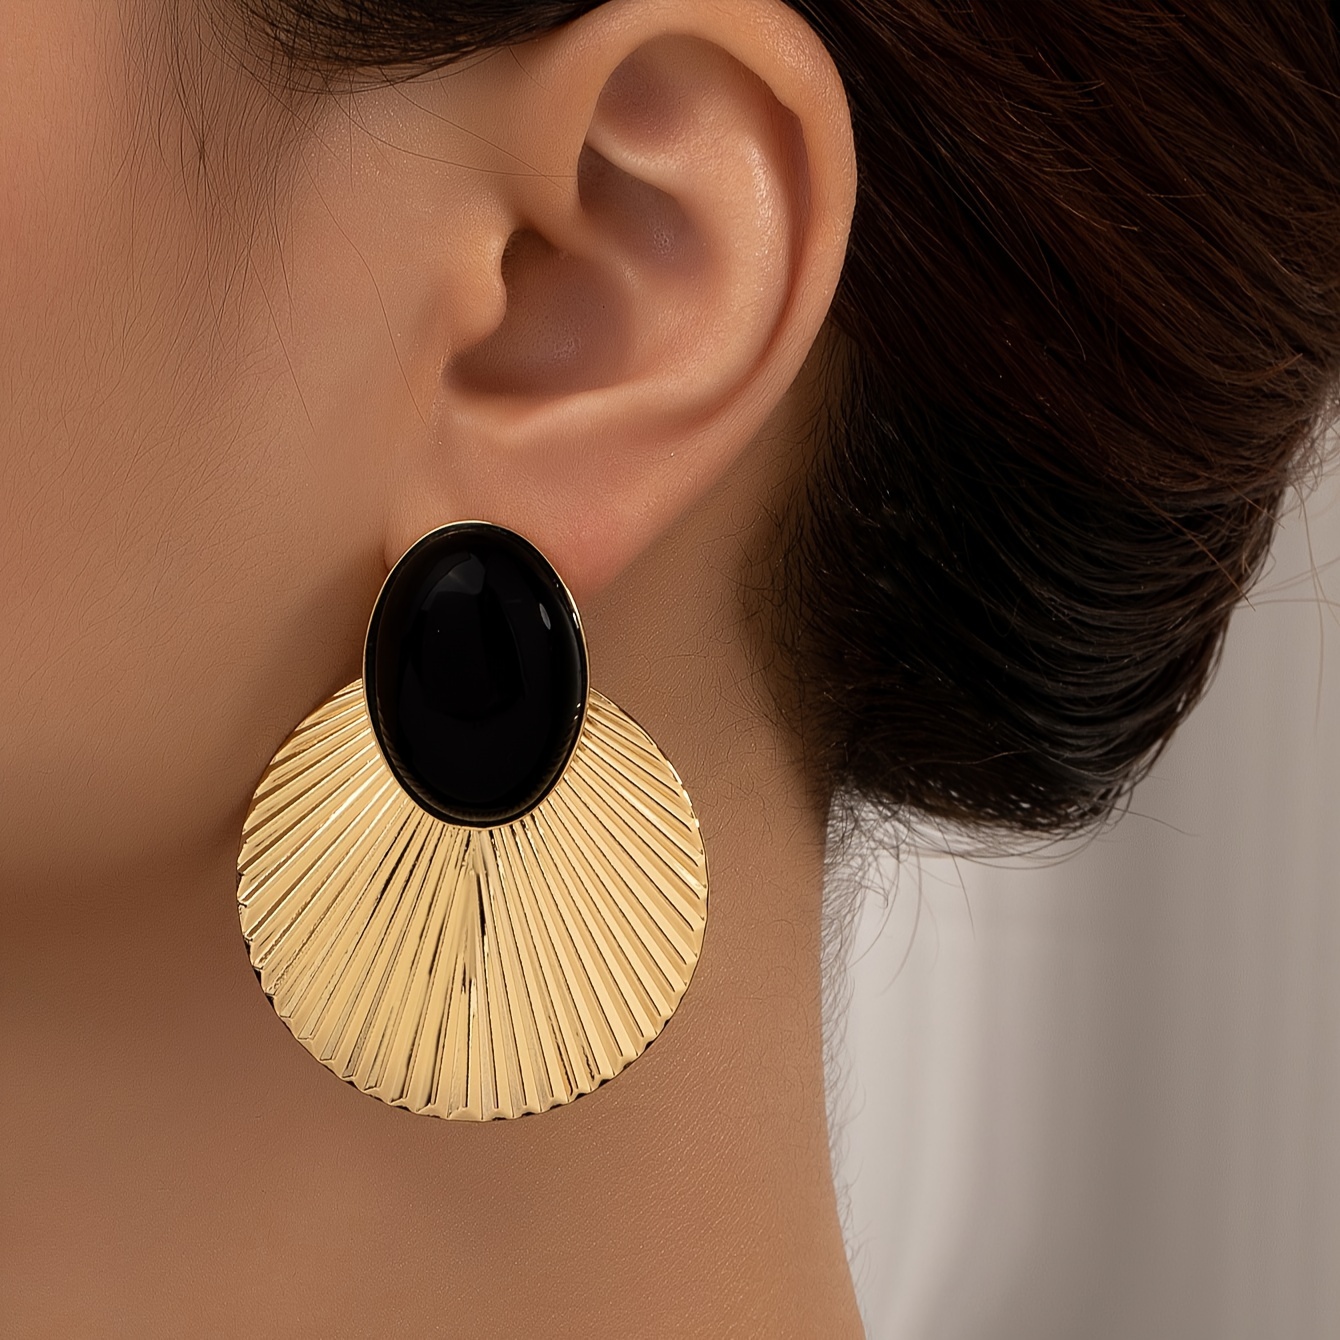 

Exquisite Black Beads With Golden Fan Design Stud Earring Iron Jewelry Vintage Bohemian Style For Women Party Ear Accessories